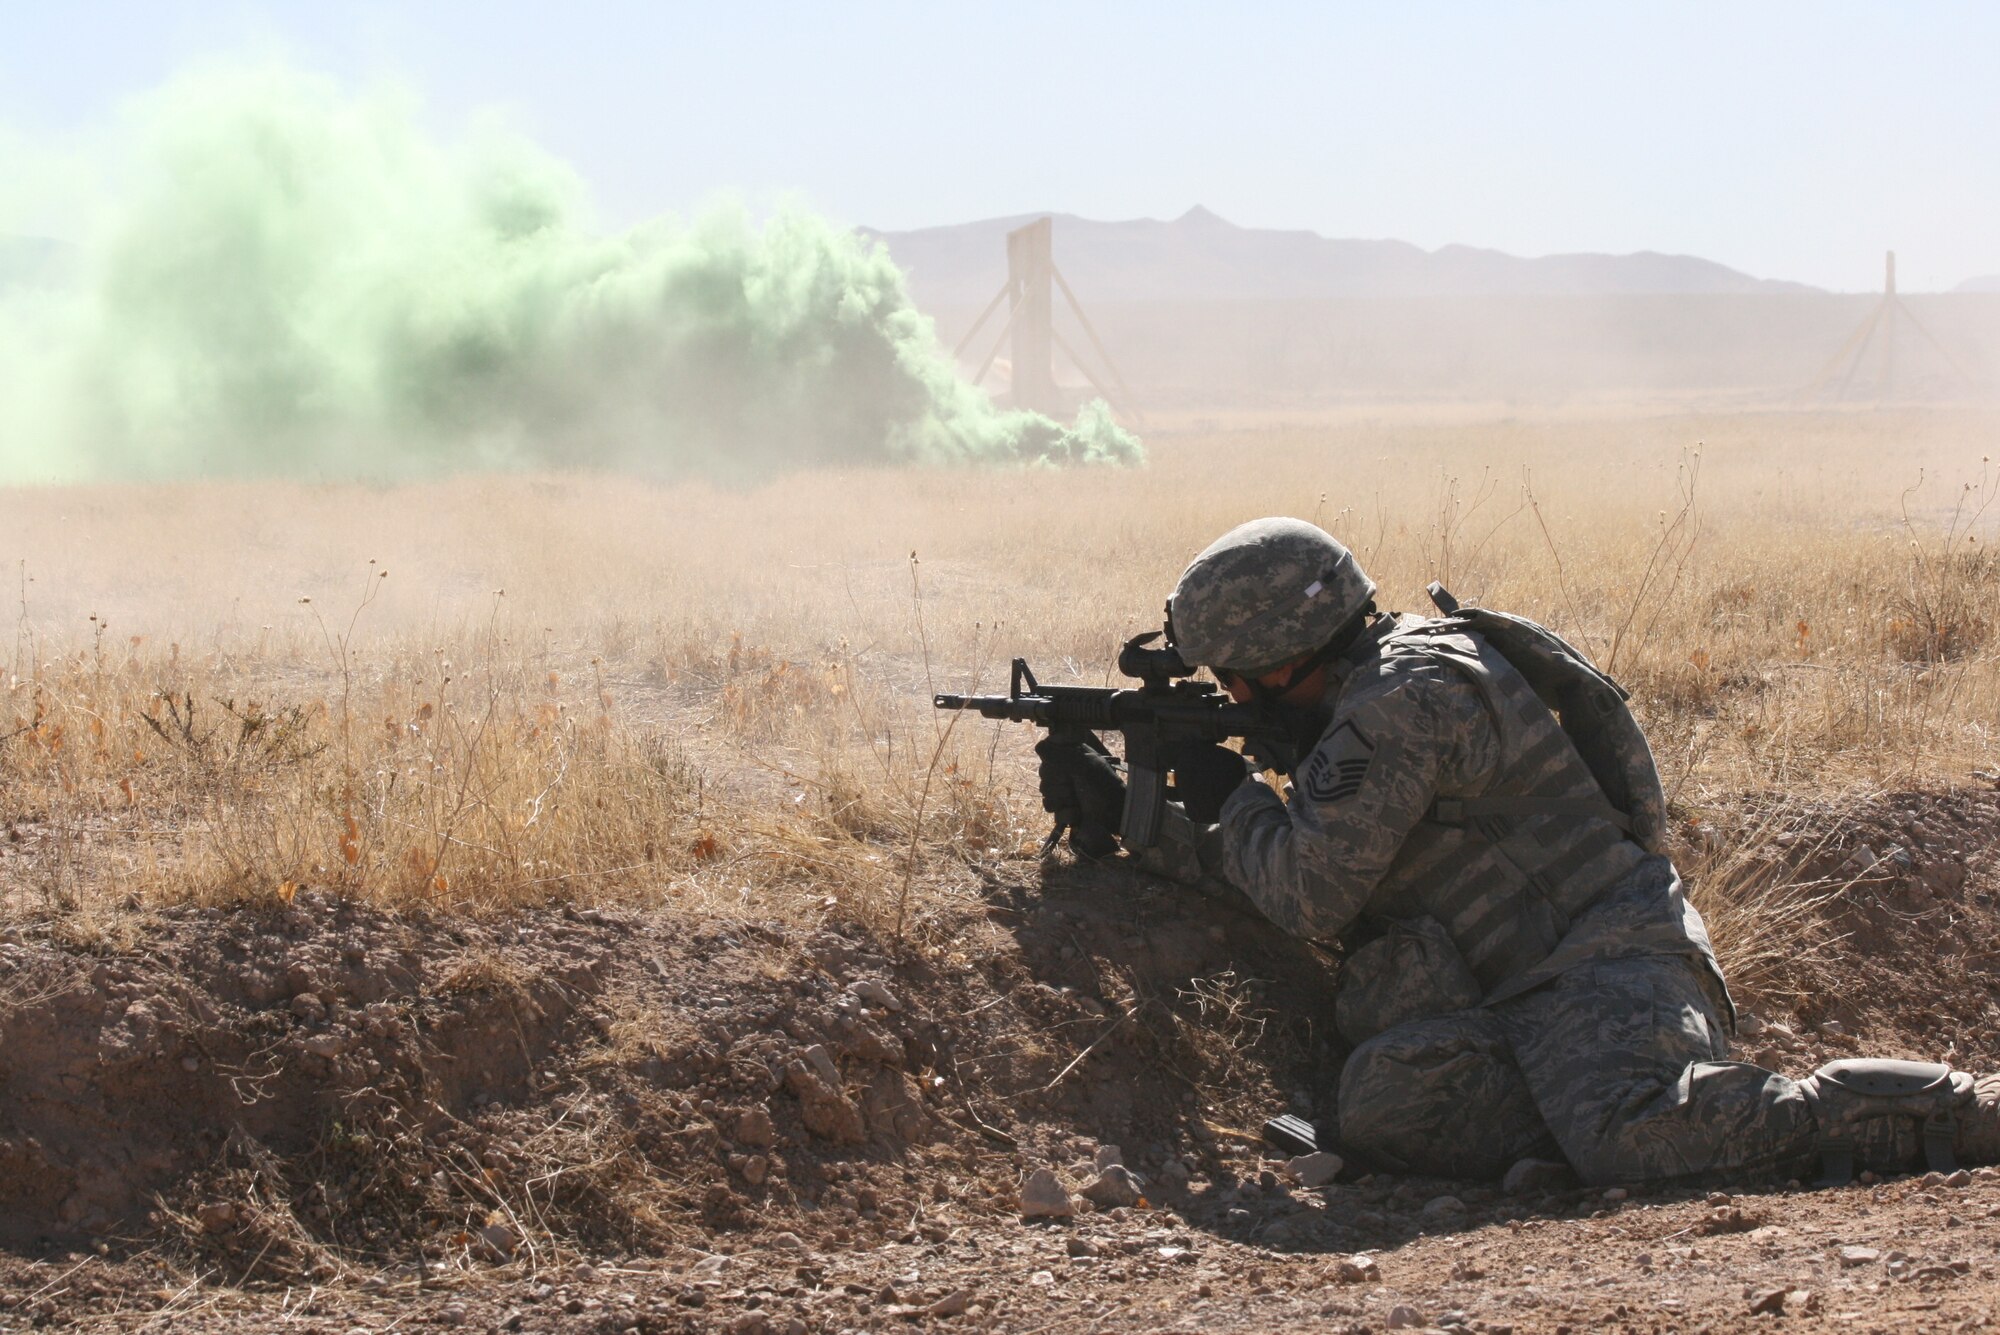 Air Force Master Sgt. Mike LaPlaca from the 144th Fighter Wing, California Air National Guard, fires at targets during a convoy live fire exercise at McGregor Range, N.M.  Photo by Maj. Deanna Bague, Fort Bliss Public Affairs Office